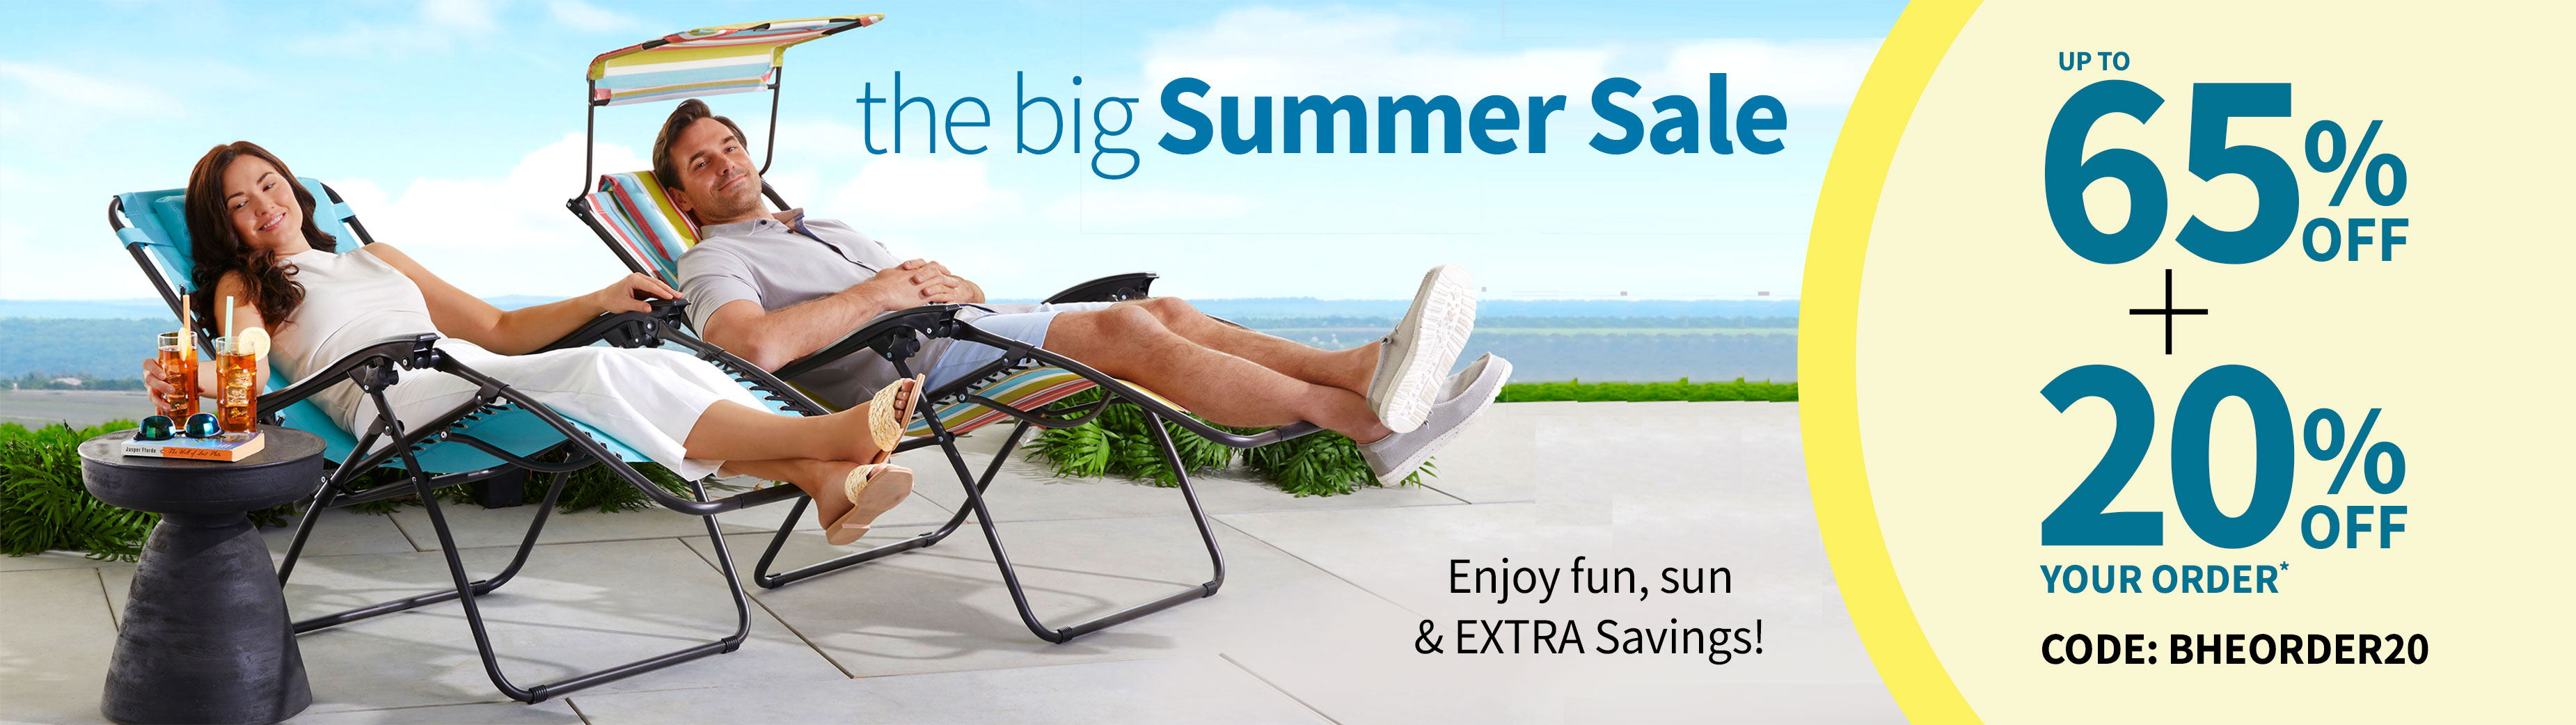 Summer Living Sitewide Sale 60% off Your Order* with code BHESW60 auto-applied at checkout.